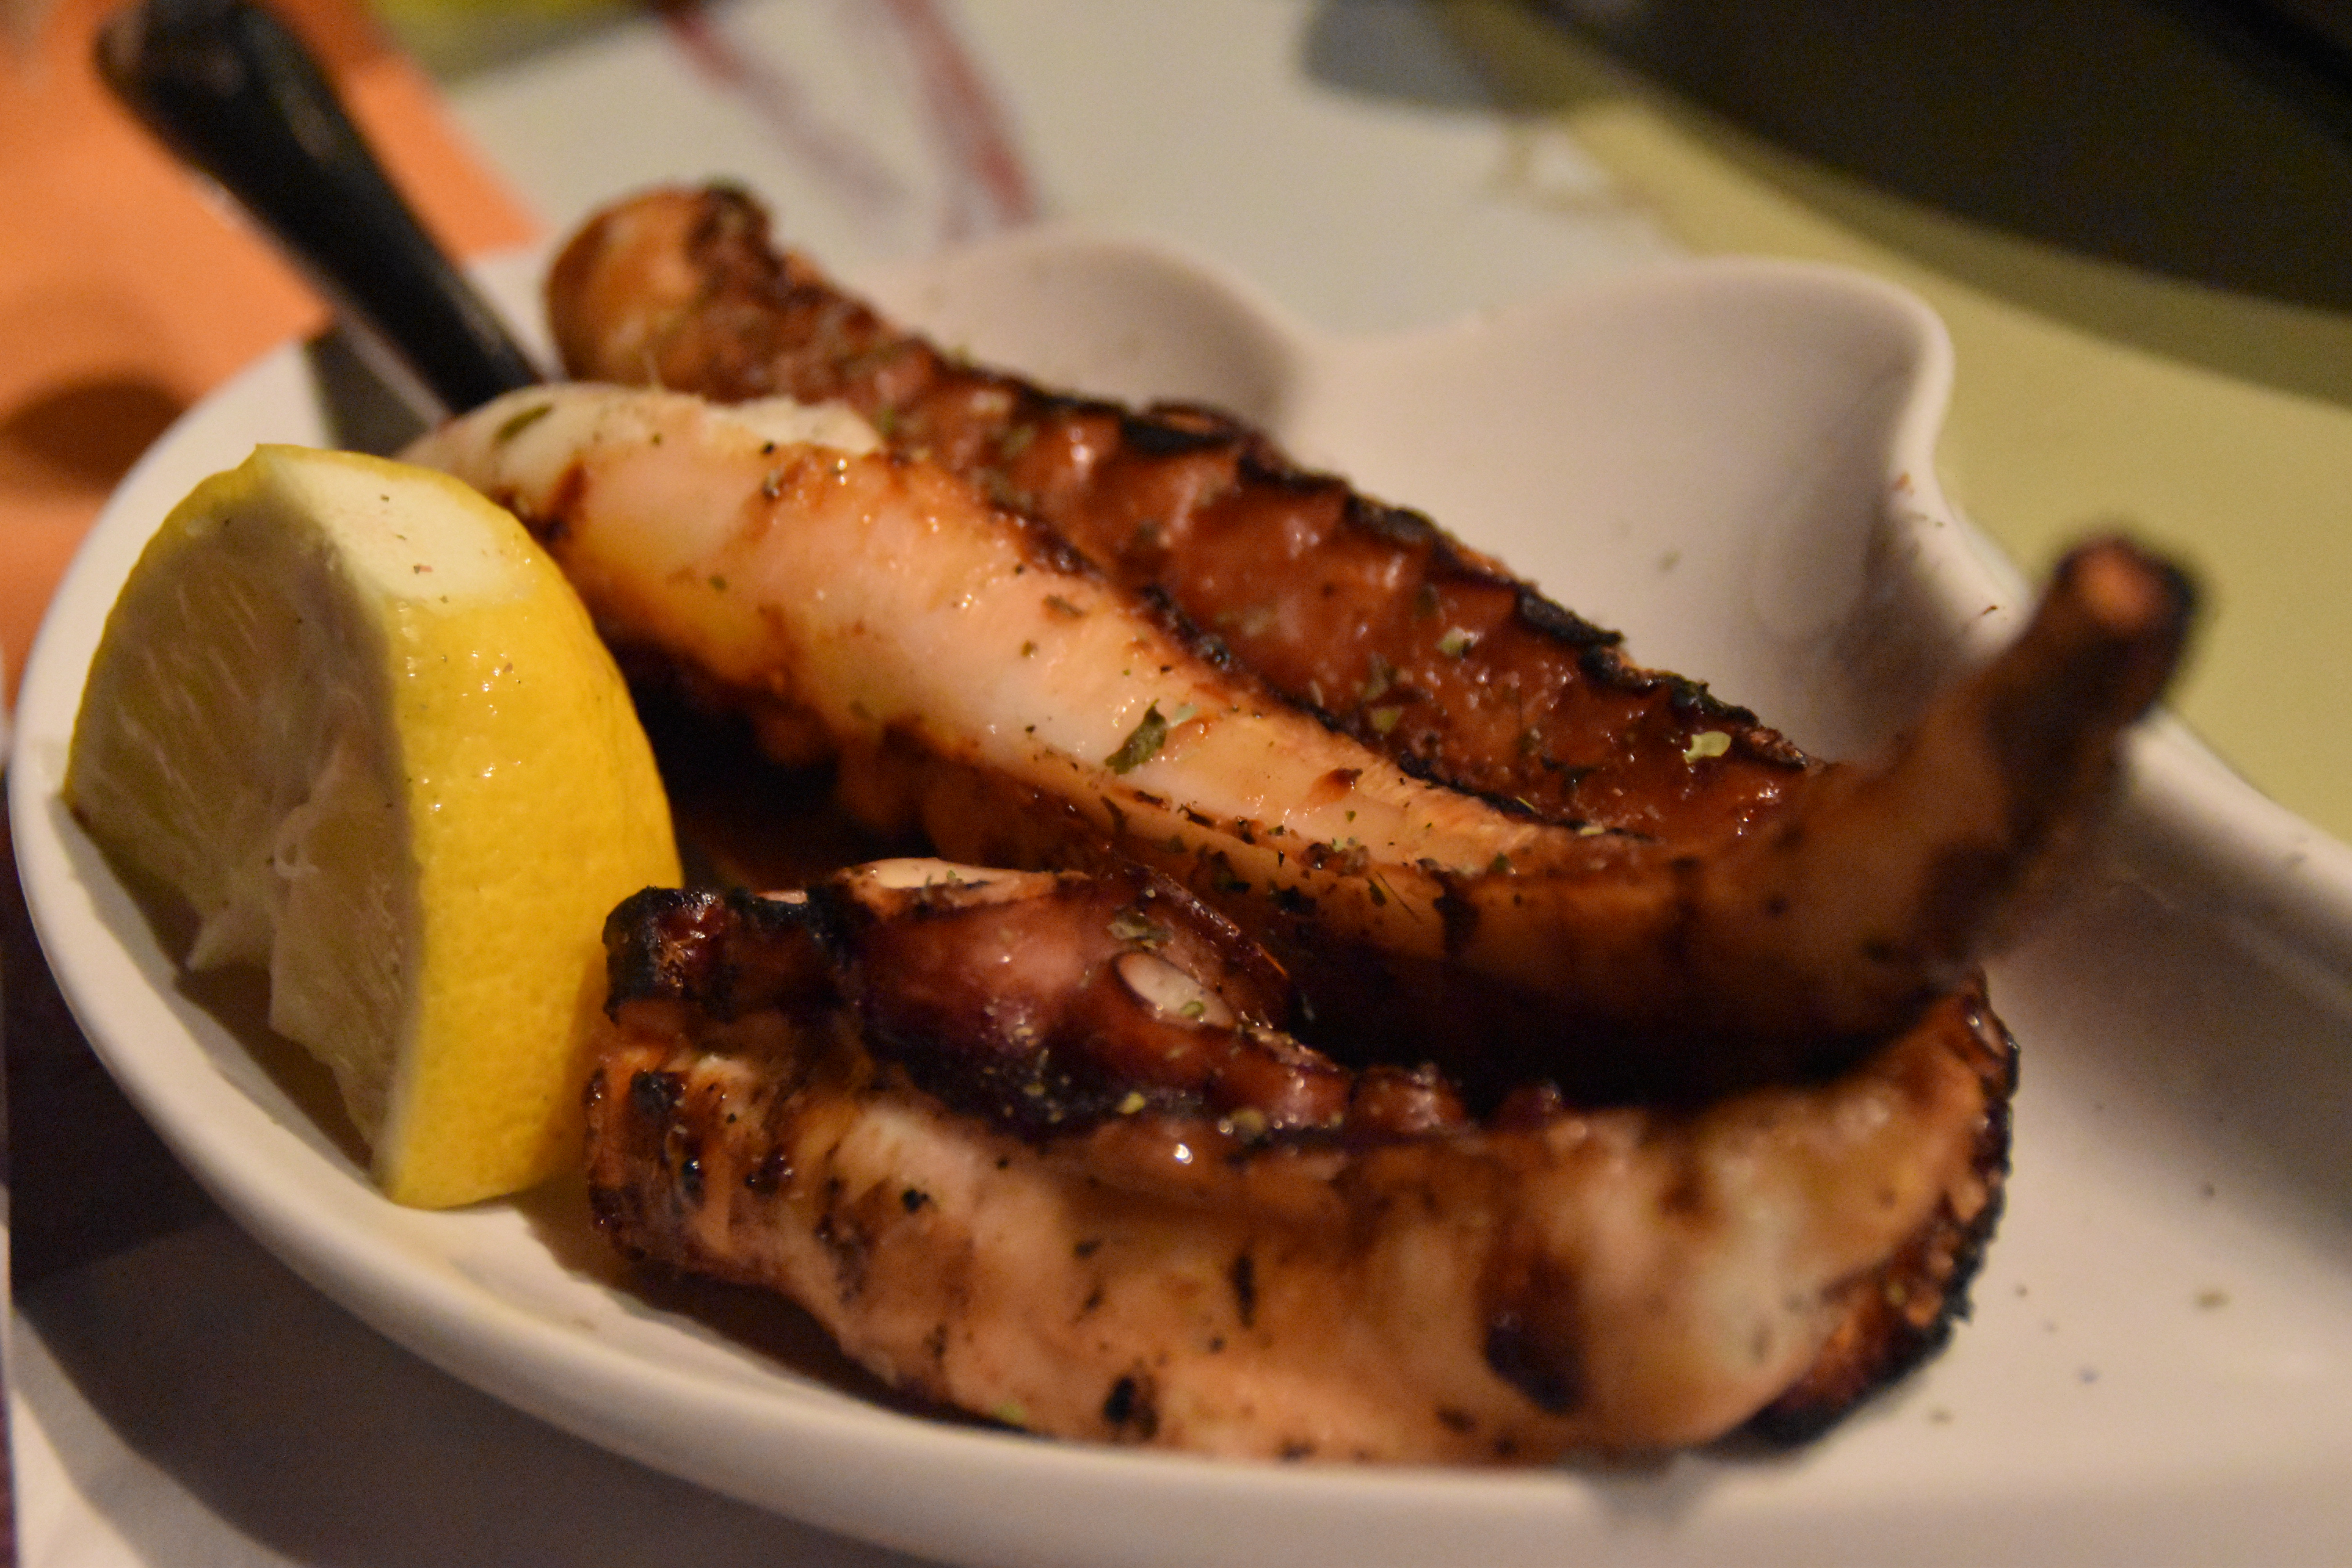 Three thick reddish octopus legs, sprinkled with hebs, served in a white plate with a quarter of a lemon on the side.